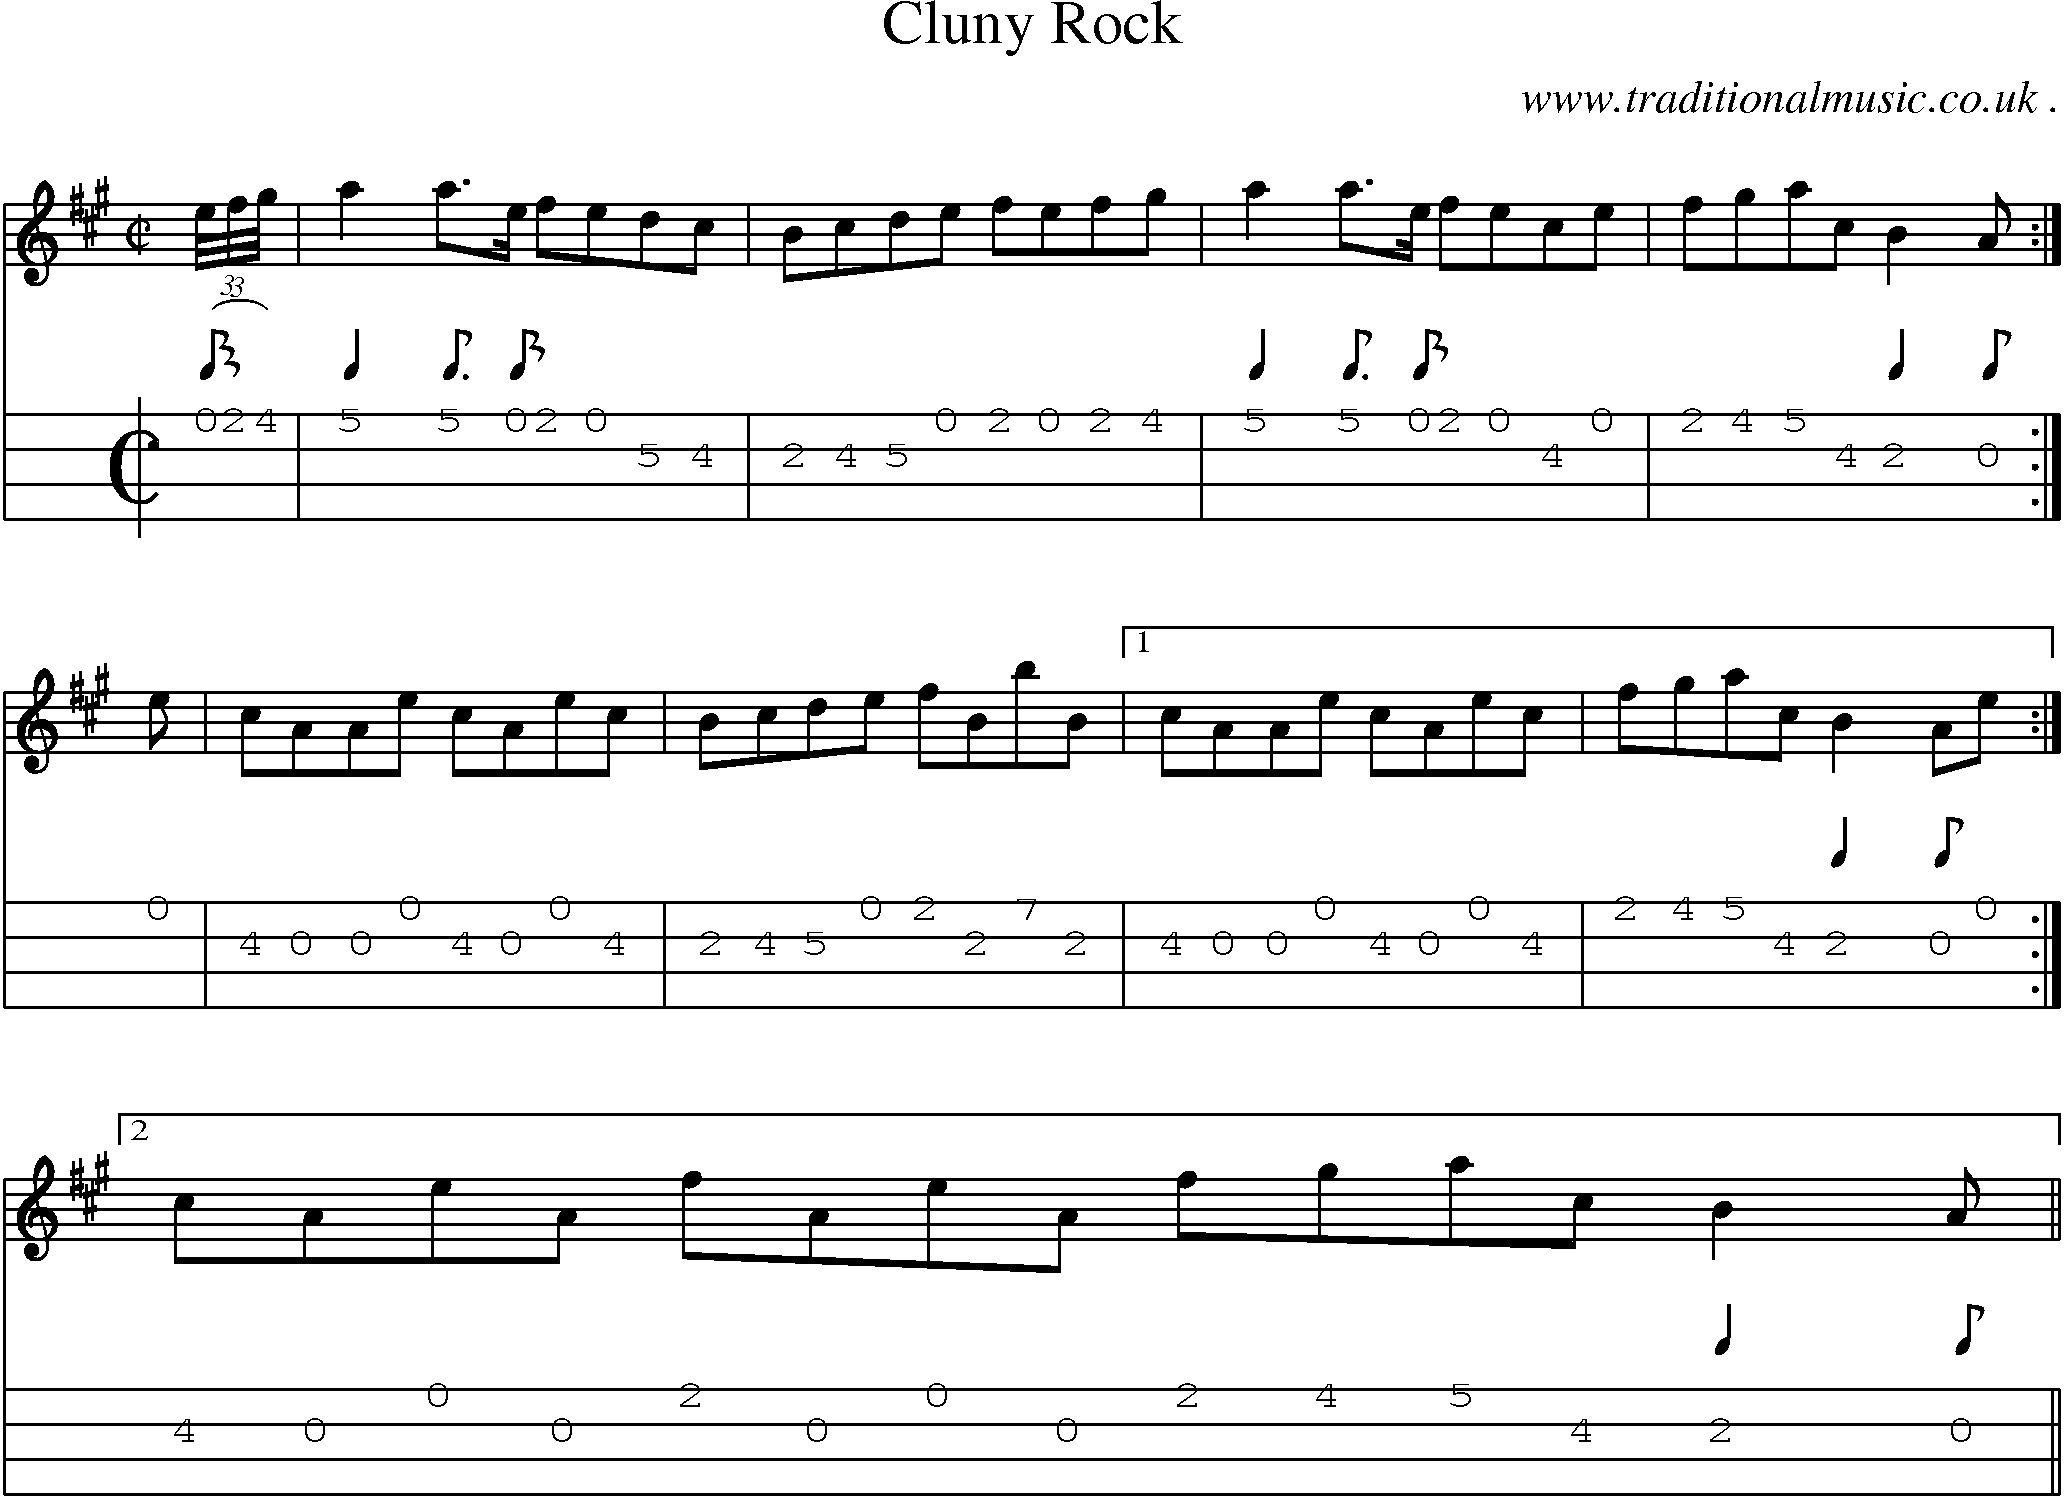 Sheet-music  score, Chords and Mandolin Tabs for Cluny Rock